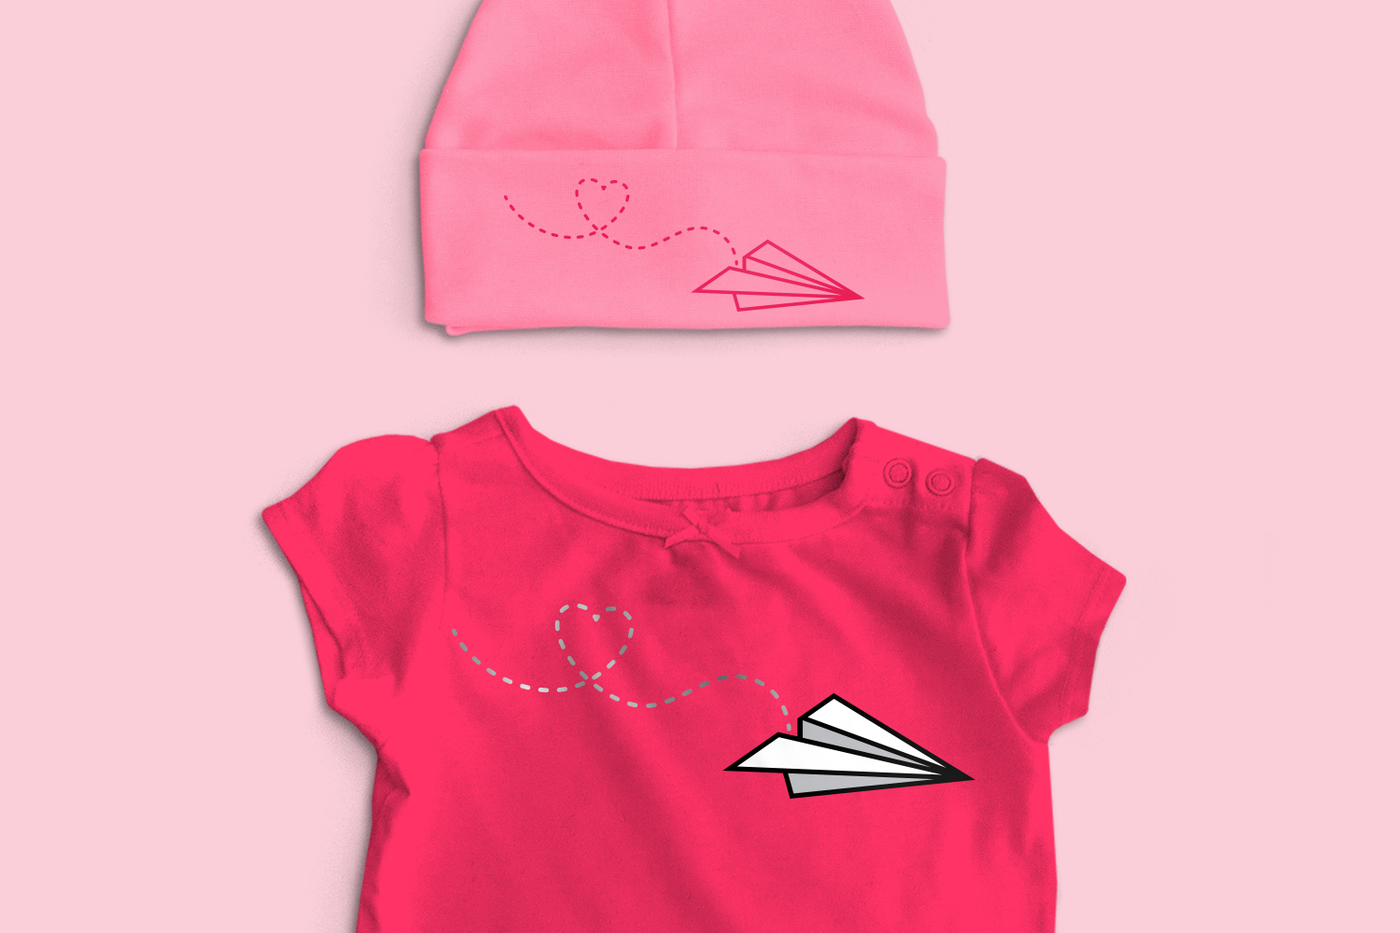 SVG design of a paper airplane with a heart trail